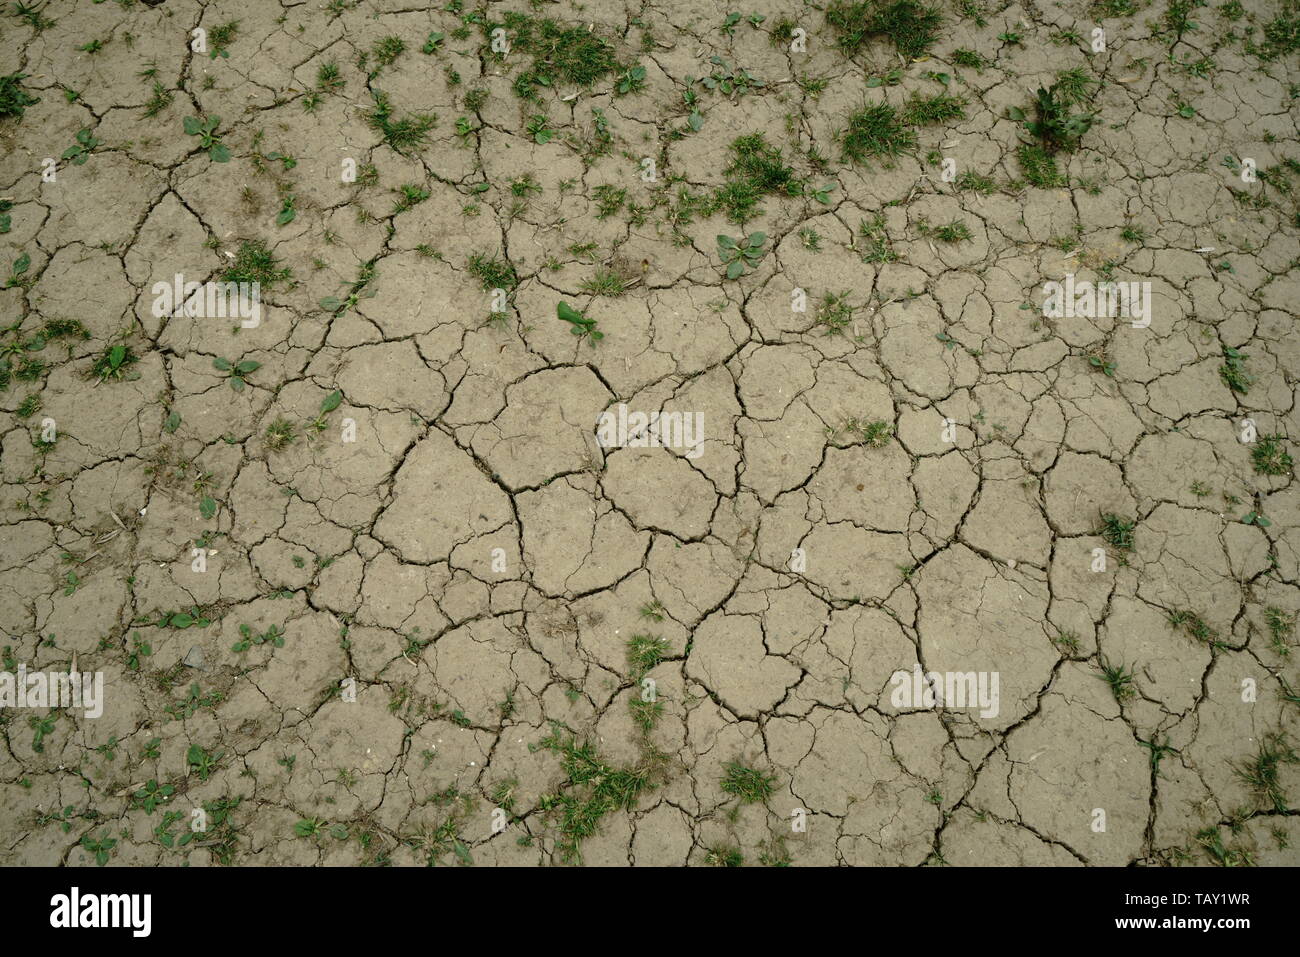 Parched earth cracked from drought conditions Stock Photo